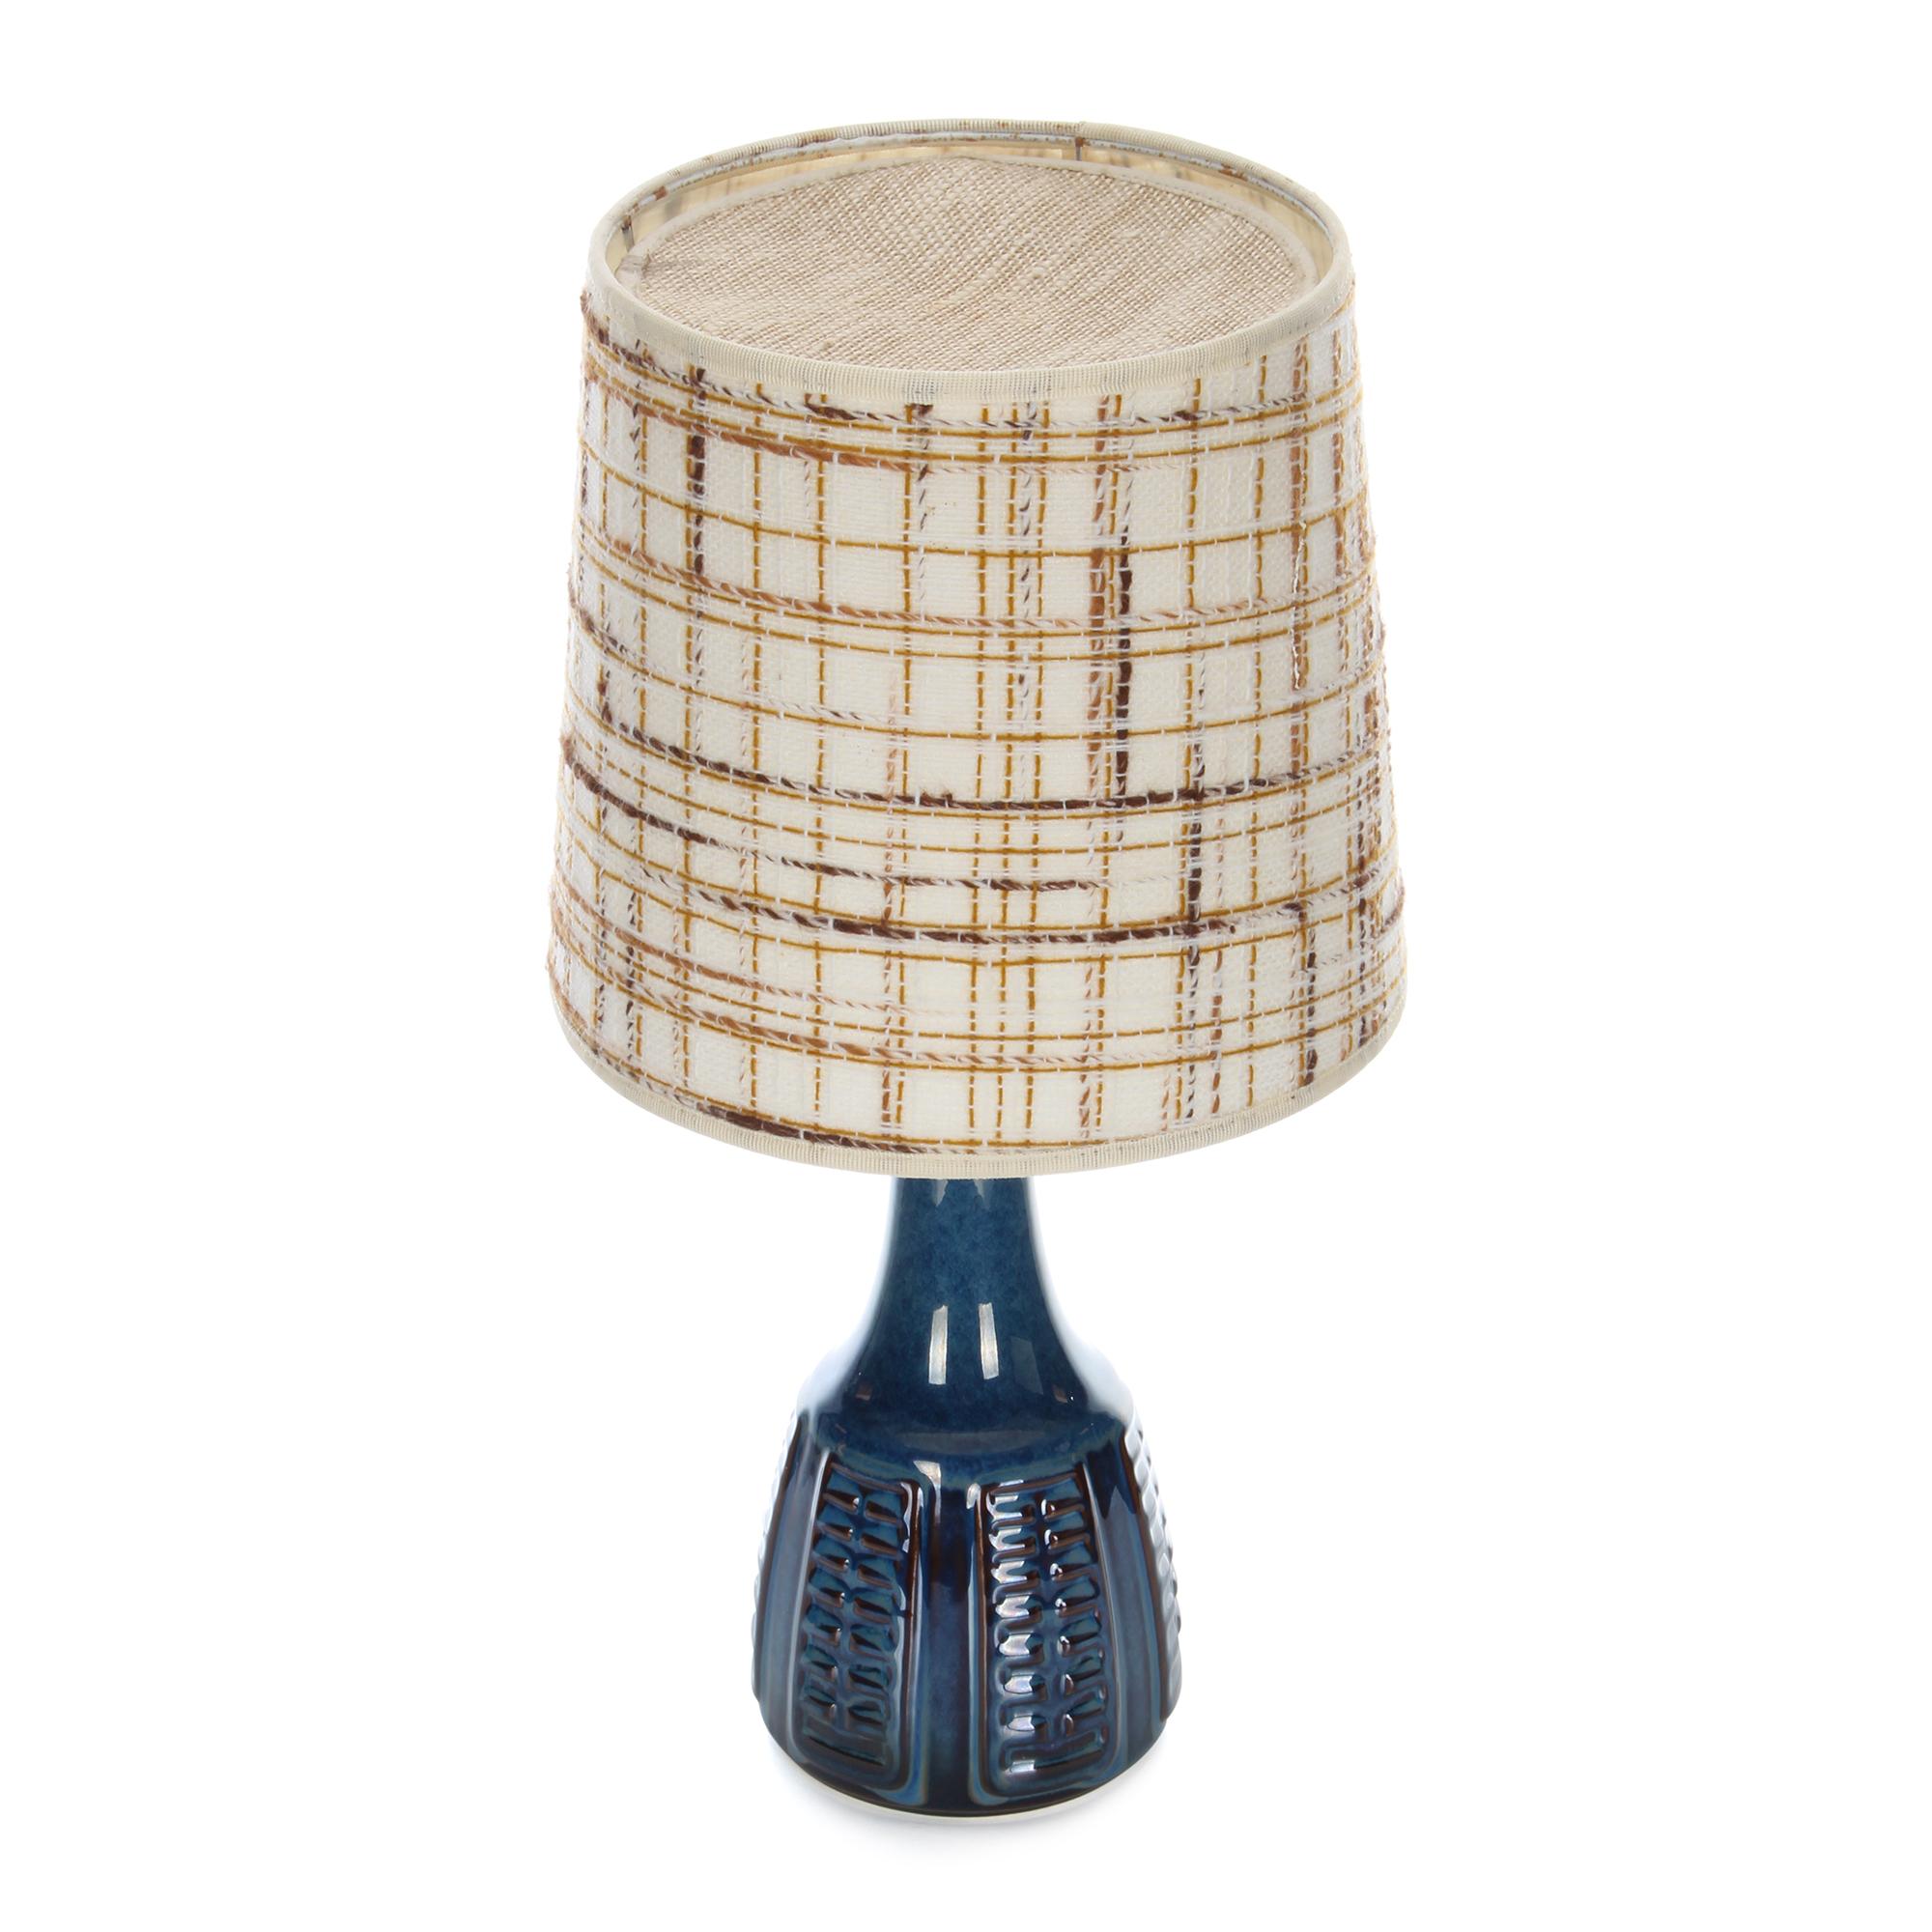 Glazed Blue Table Lamp by Einar Johansen for Soholm 1960s, with Vintage Shade Included